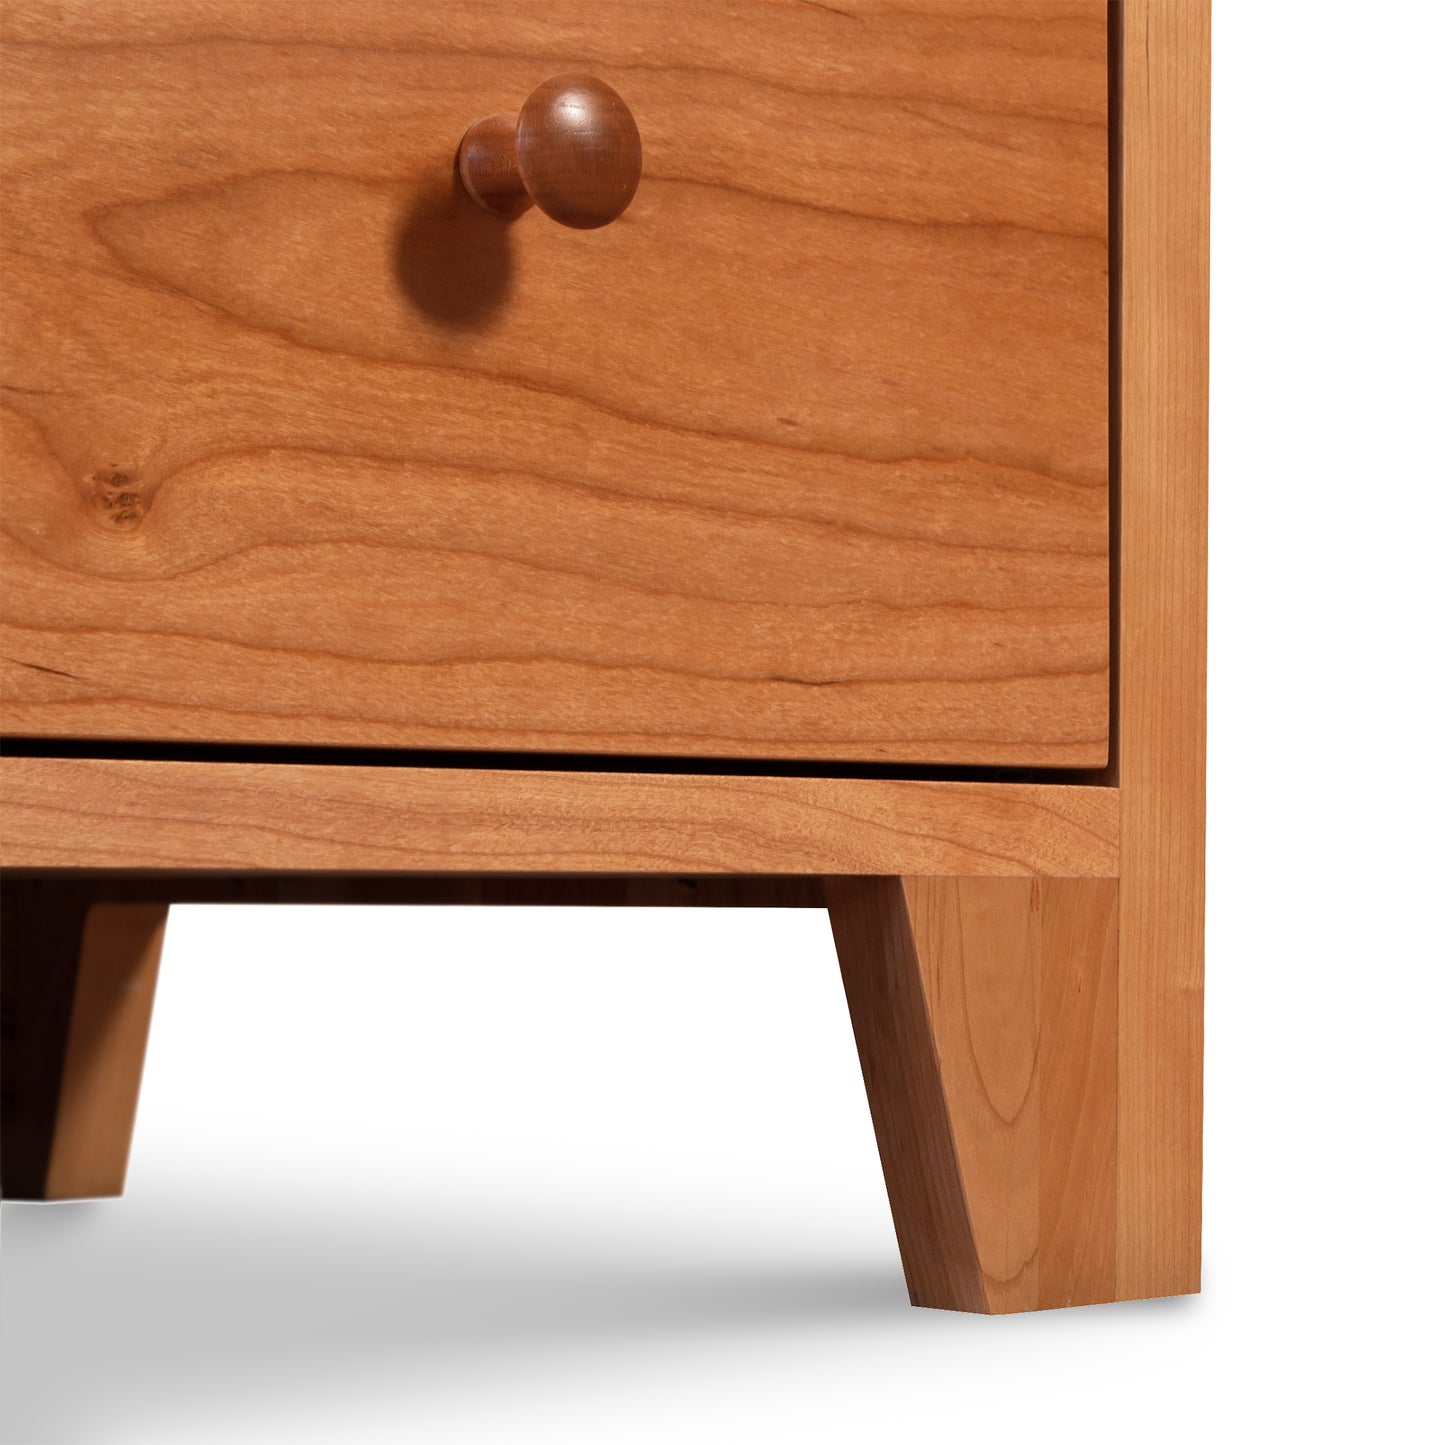 A close up of a Lyndon Furniture American Country 5-Drawer Chest, handmade with a drawer made of solid wood.